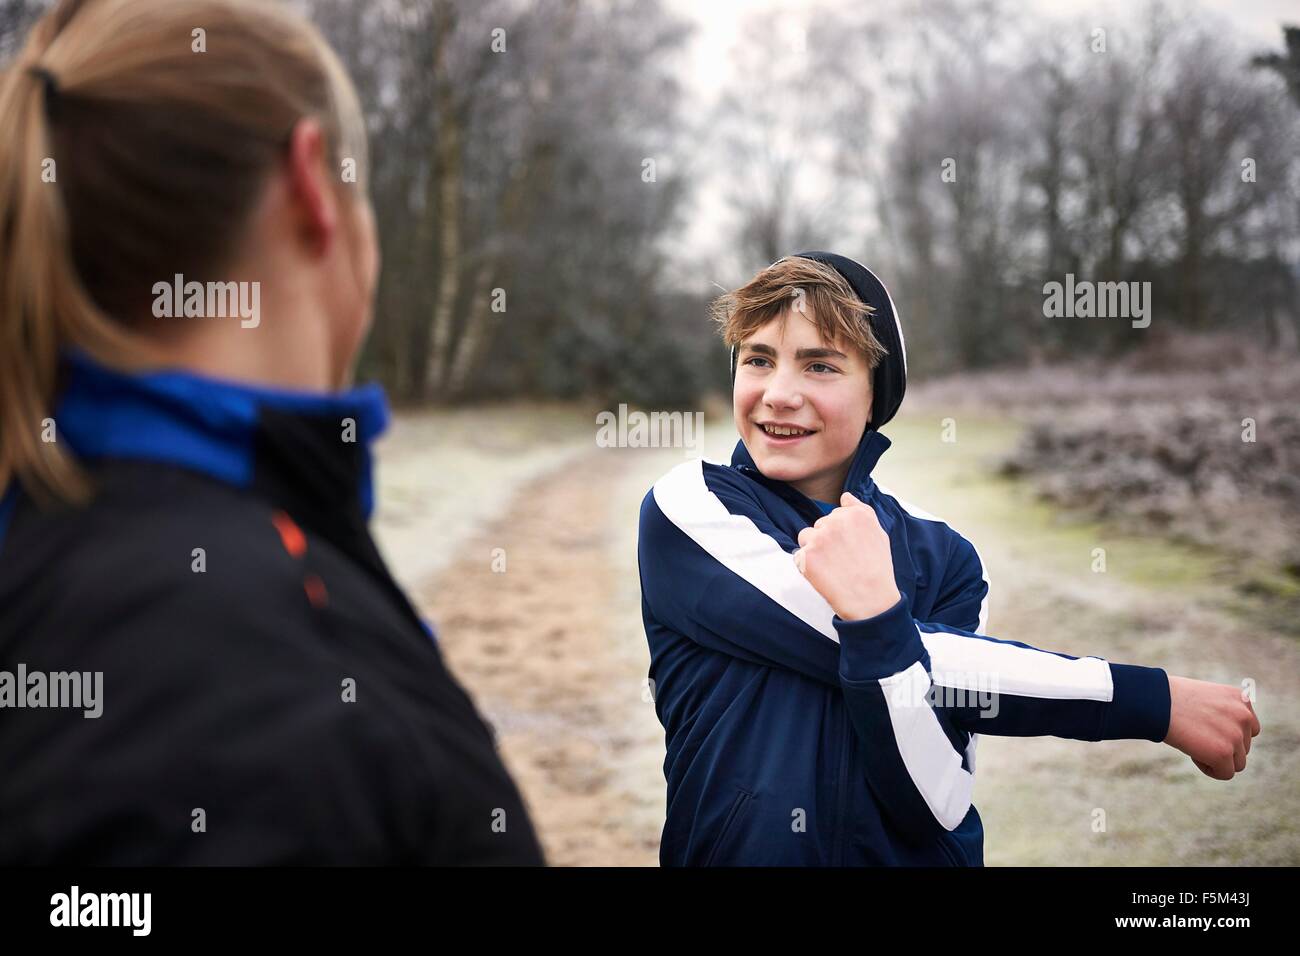 Teenage boy stretching arm, looking at mother smiling Stock Photo